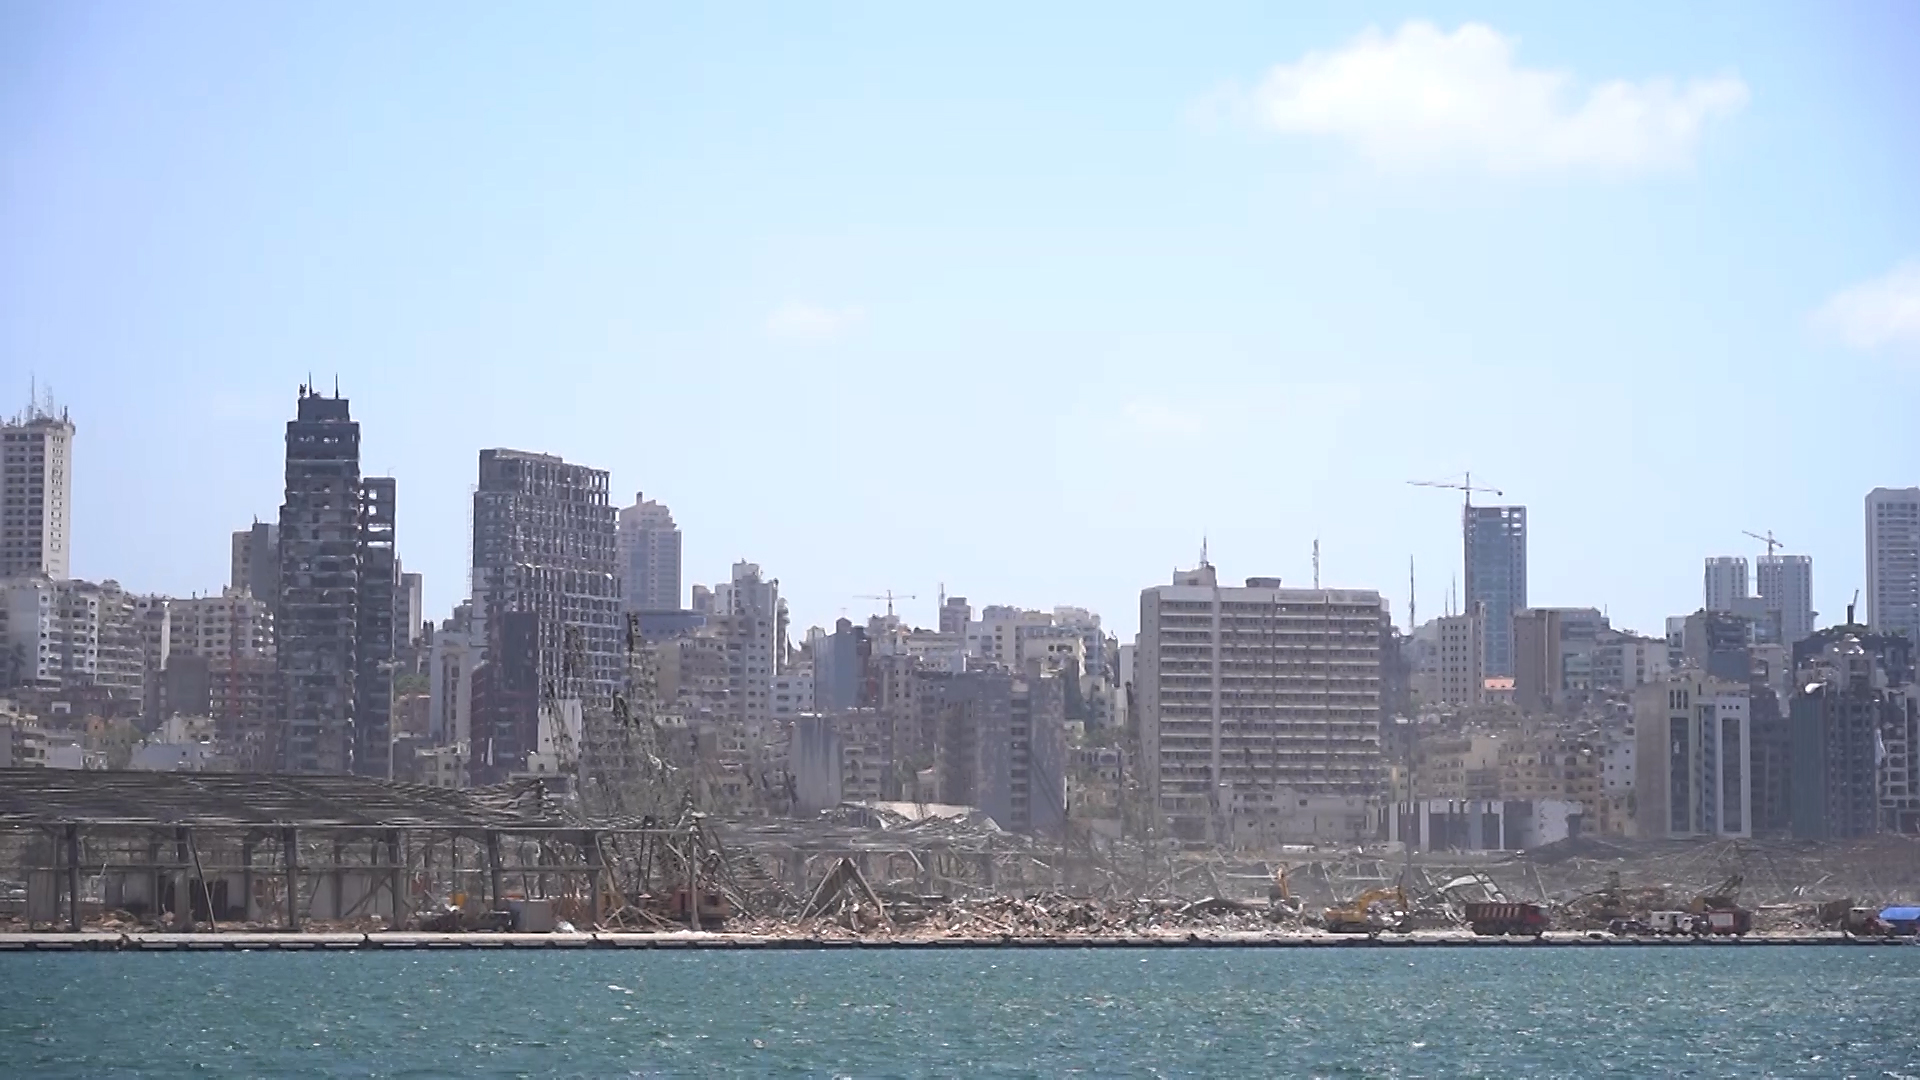 Destruction caused by the explosion in the port of Beirut on August 4, 2020.